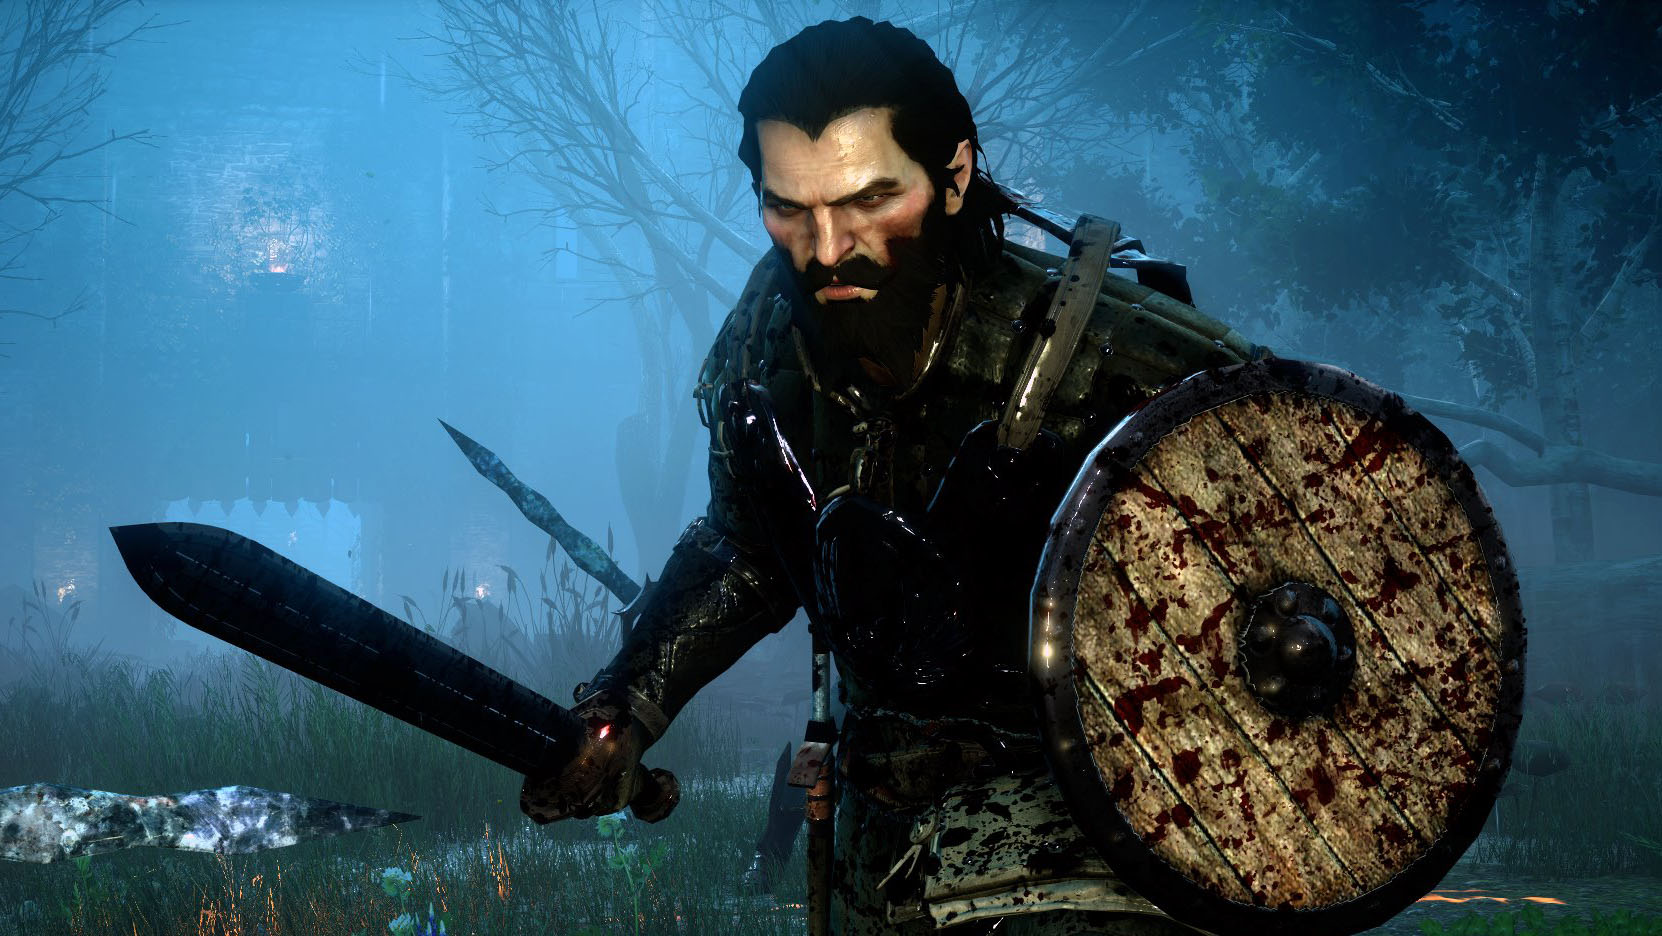 Blackwall volunteered to the Grey Wardens as he believed wholeheartedly in their mission.